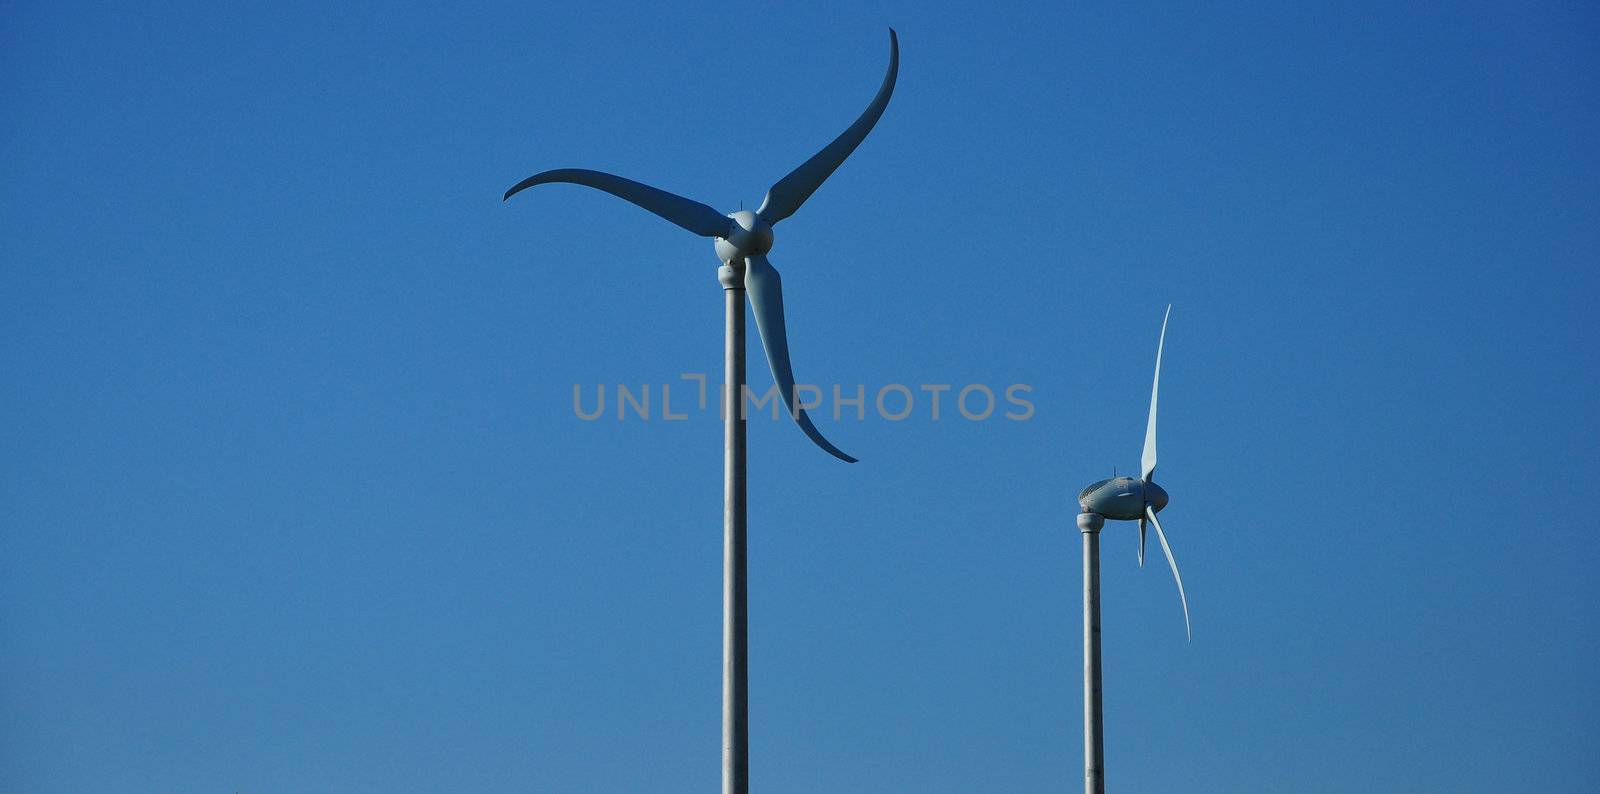 power, portugal, wind, electricity, energy, generation, fuel, turbine, conservation